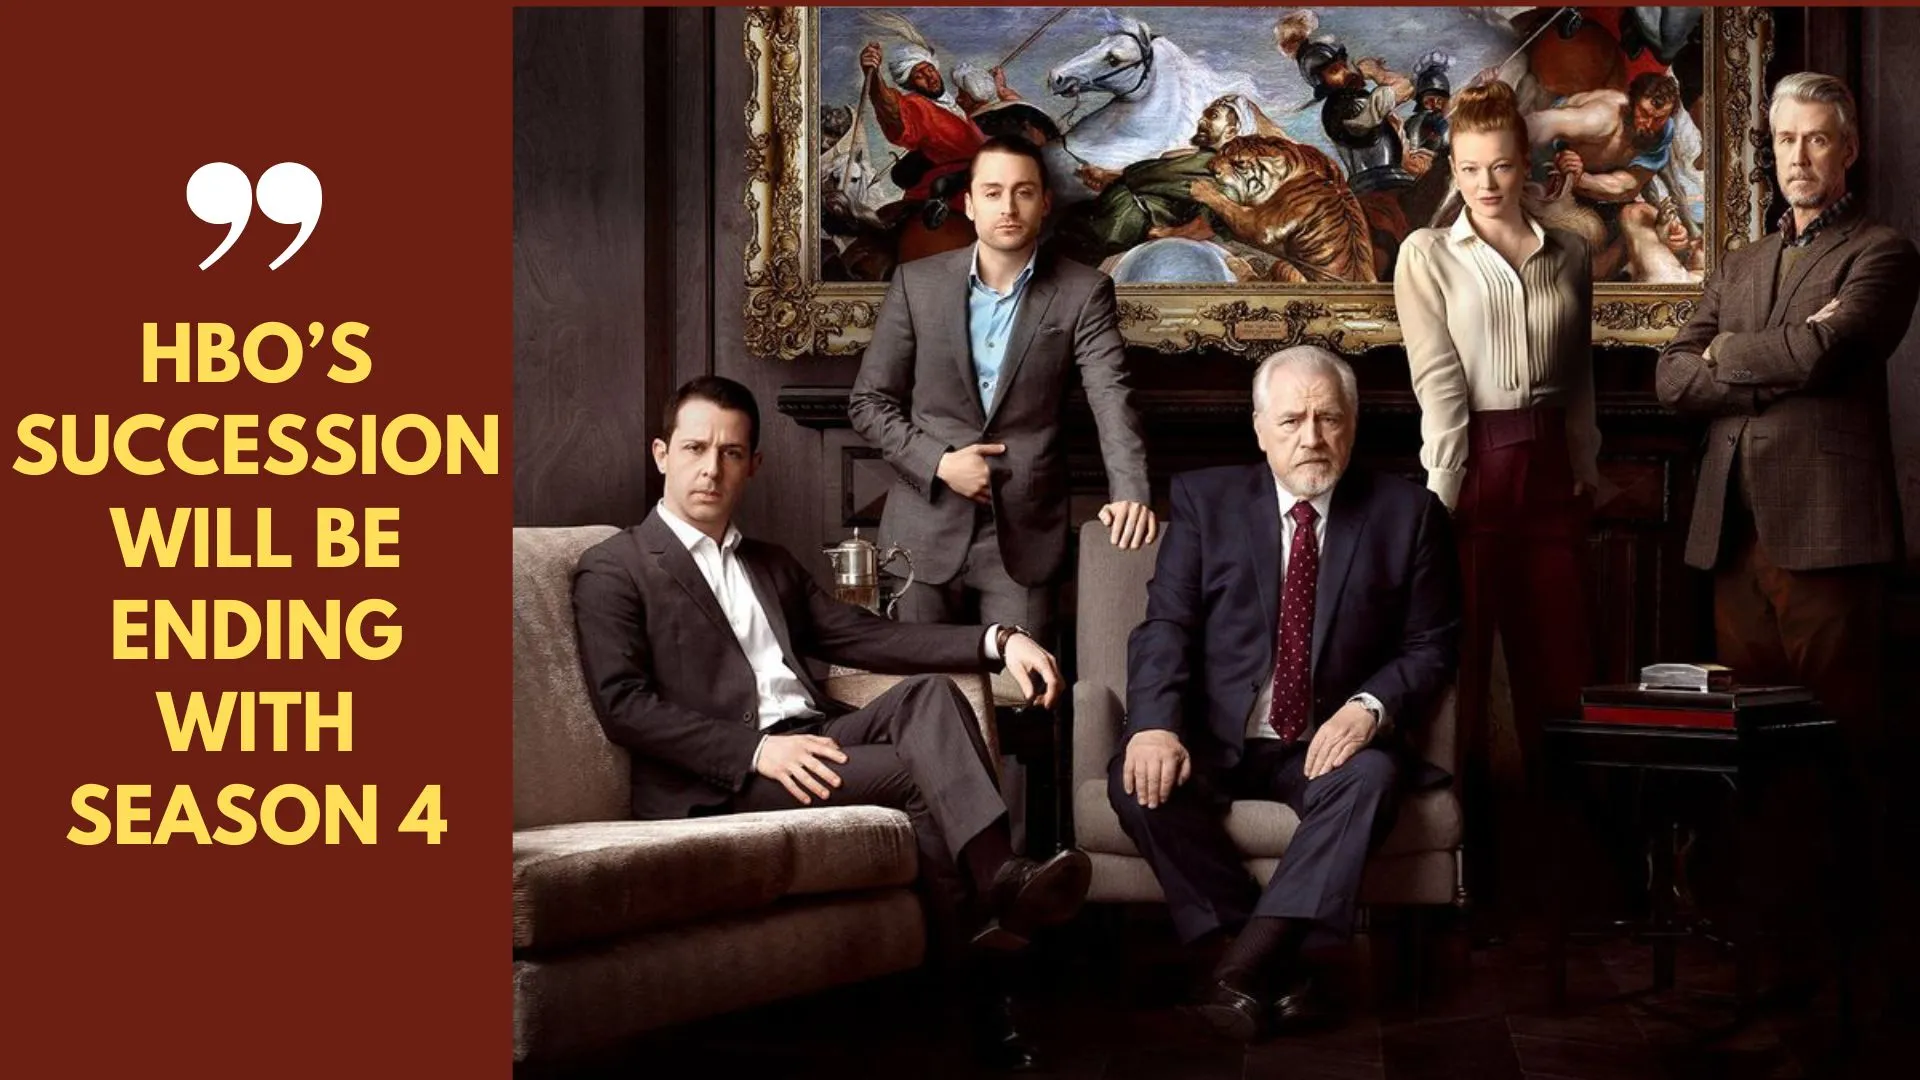 HBO’s Succession will be Ending With Season 4 (Image credit: rottentomatoes)